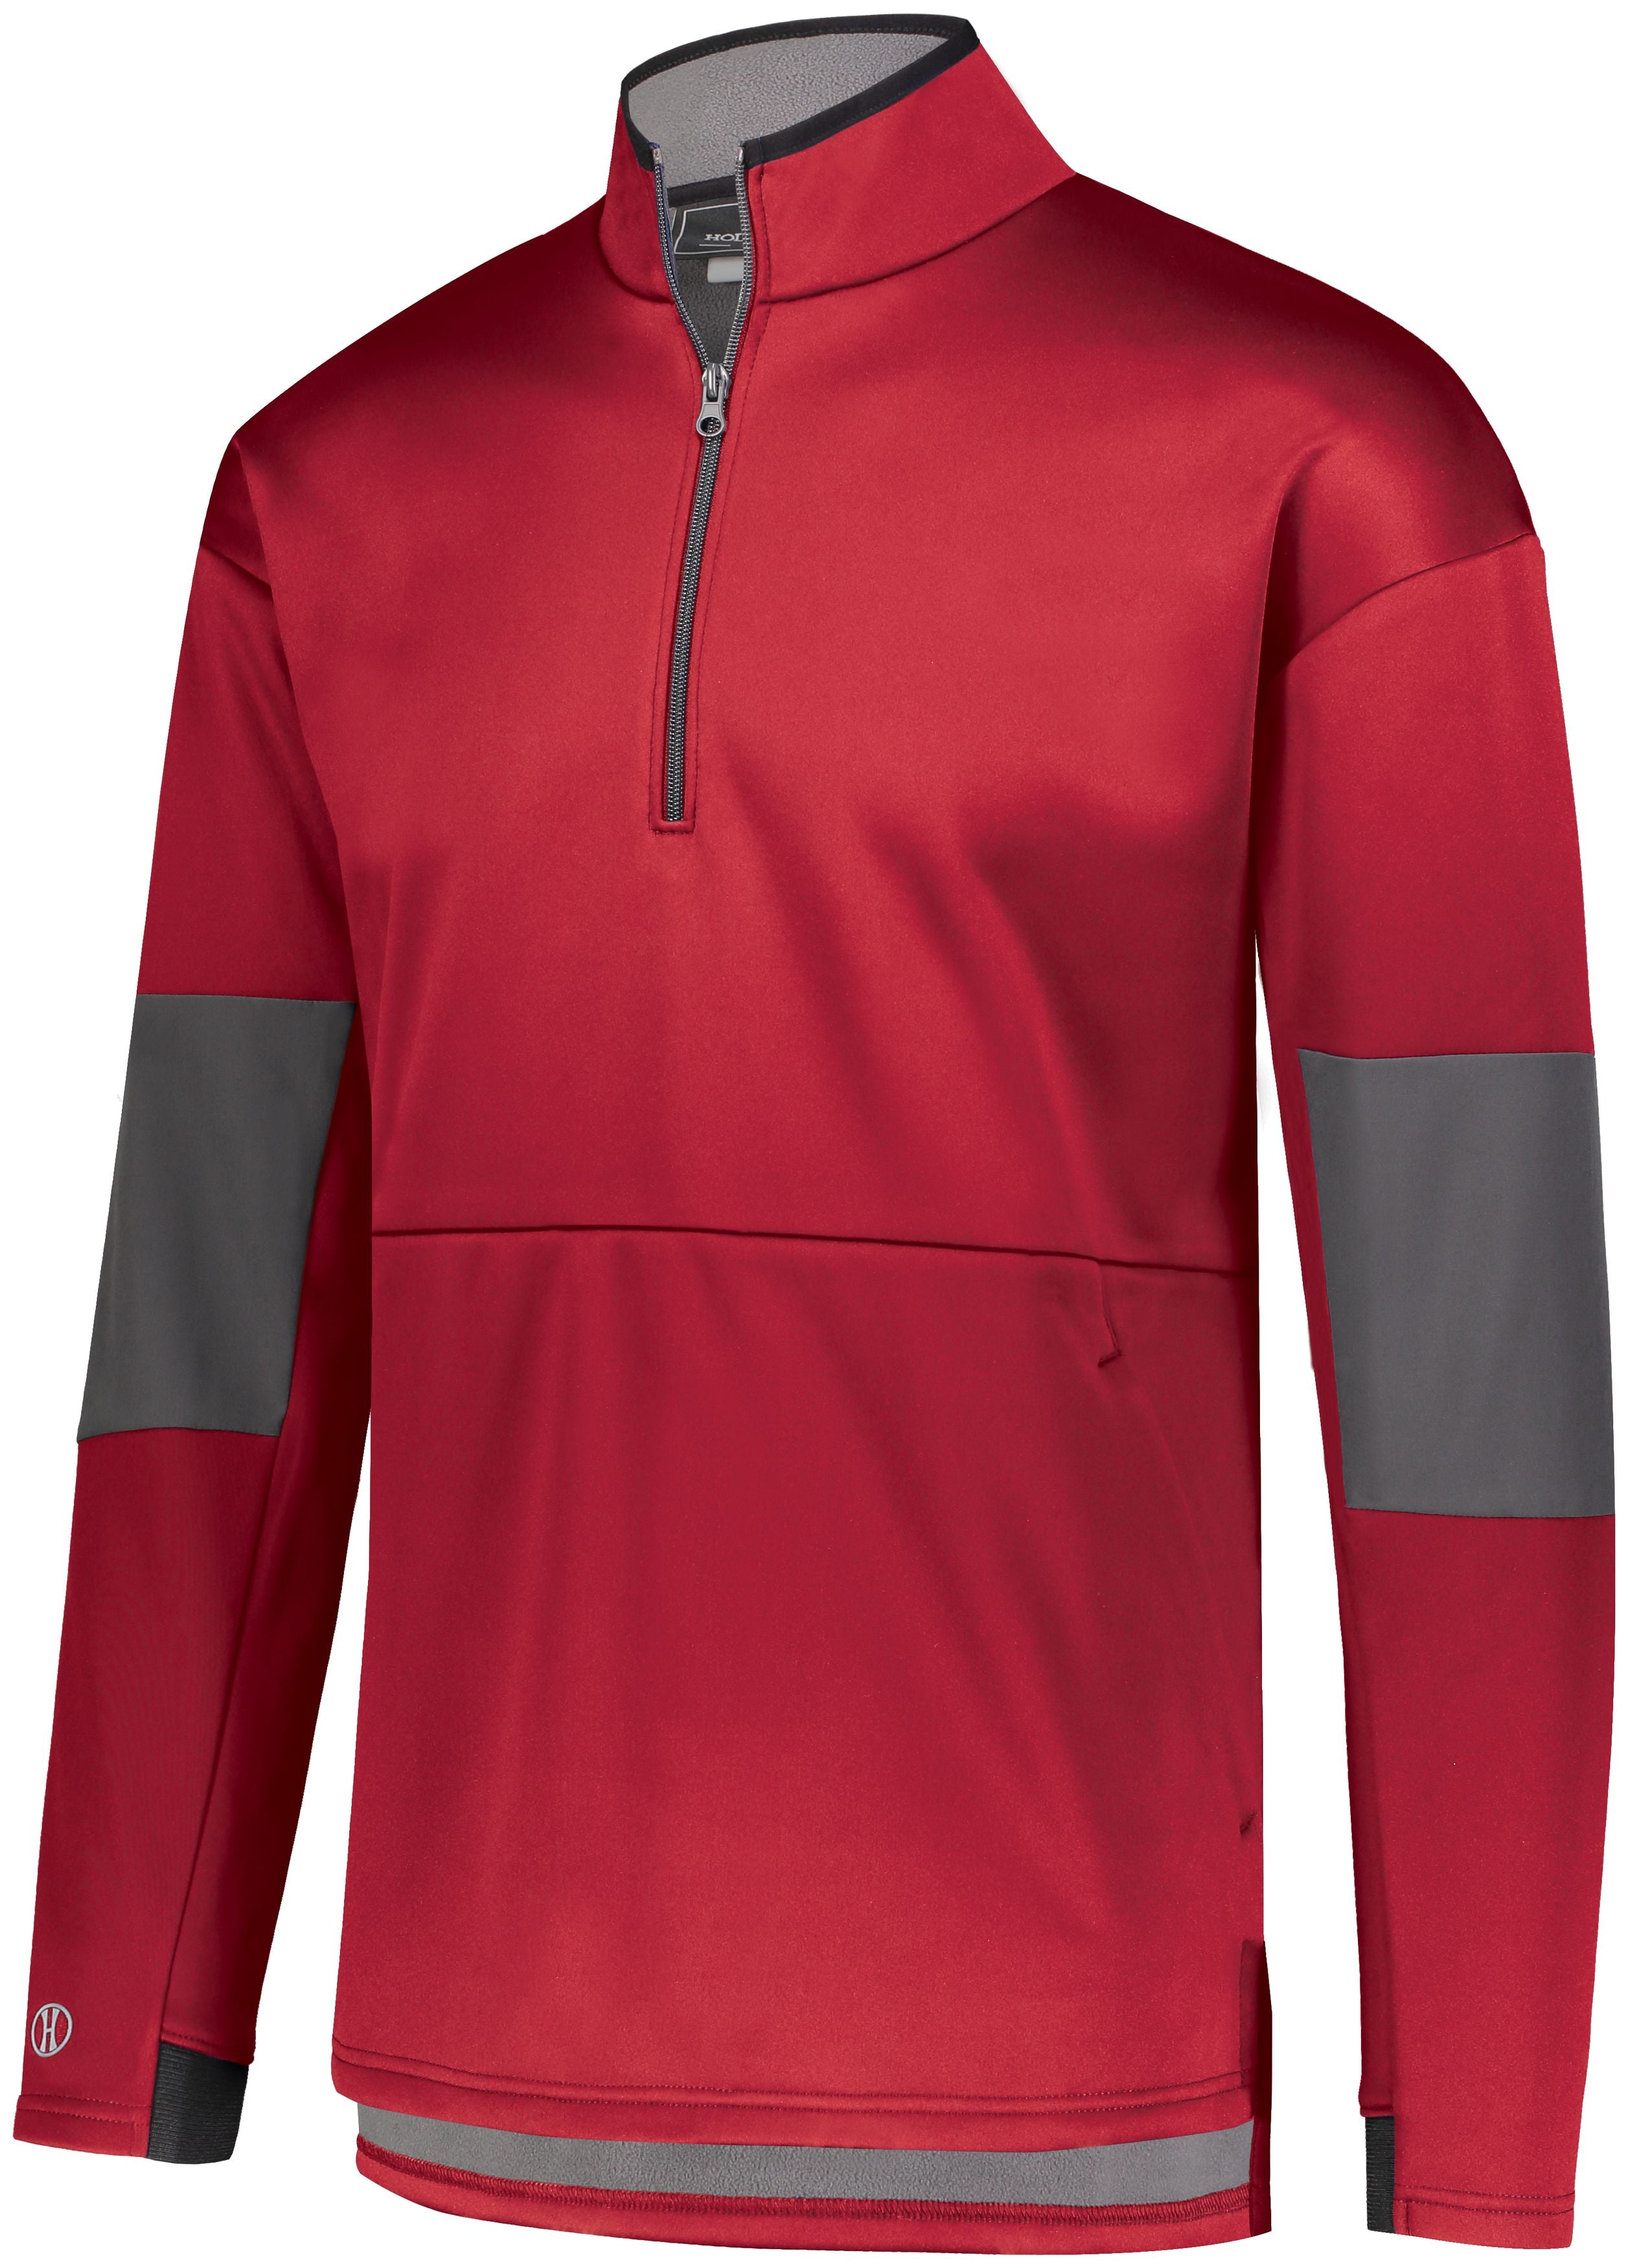 Holloway Sof-Stretch Pullover in Scarlet/Carbon  -Part of the Adult, Adult-Pullover, Holloway, Outerwear product lines at KanaleyCreations.com